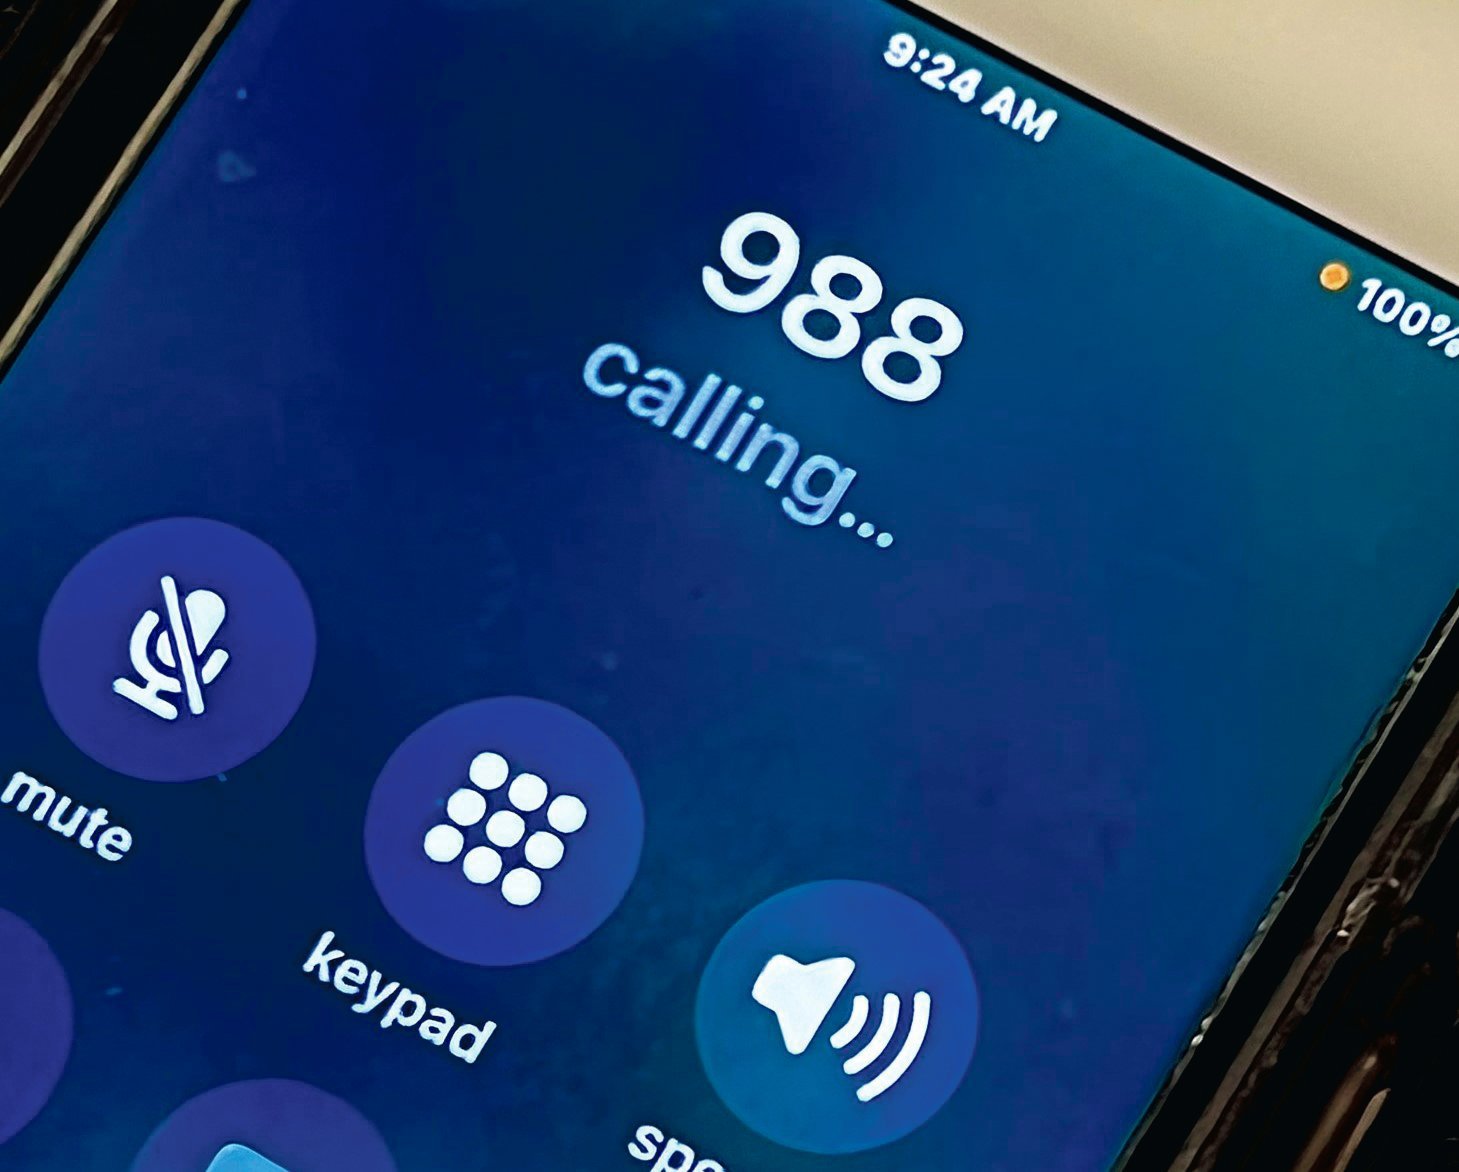 The House first passed legislation in 2021 designating “988” as the number to call for the National Suicide Prevention Hotline.